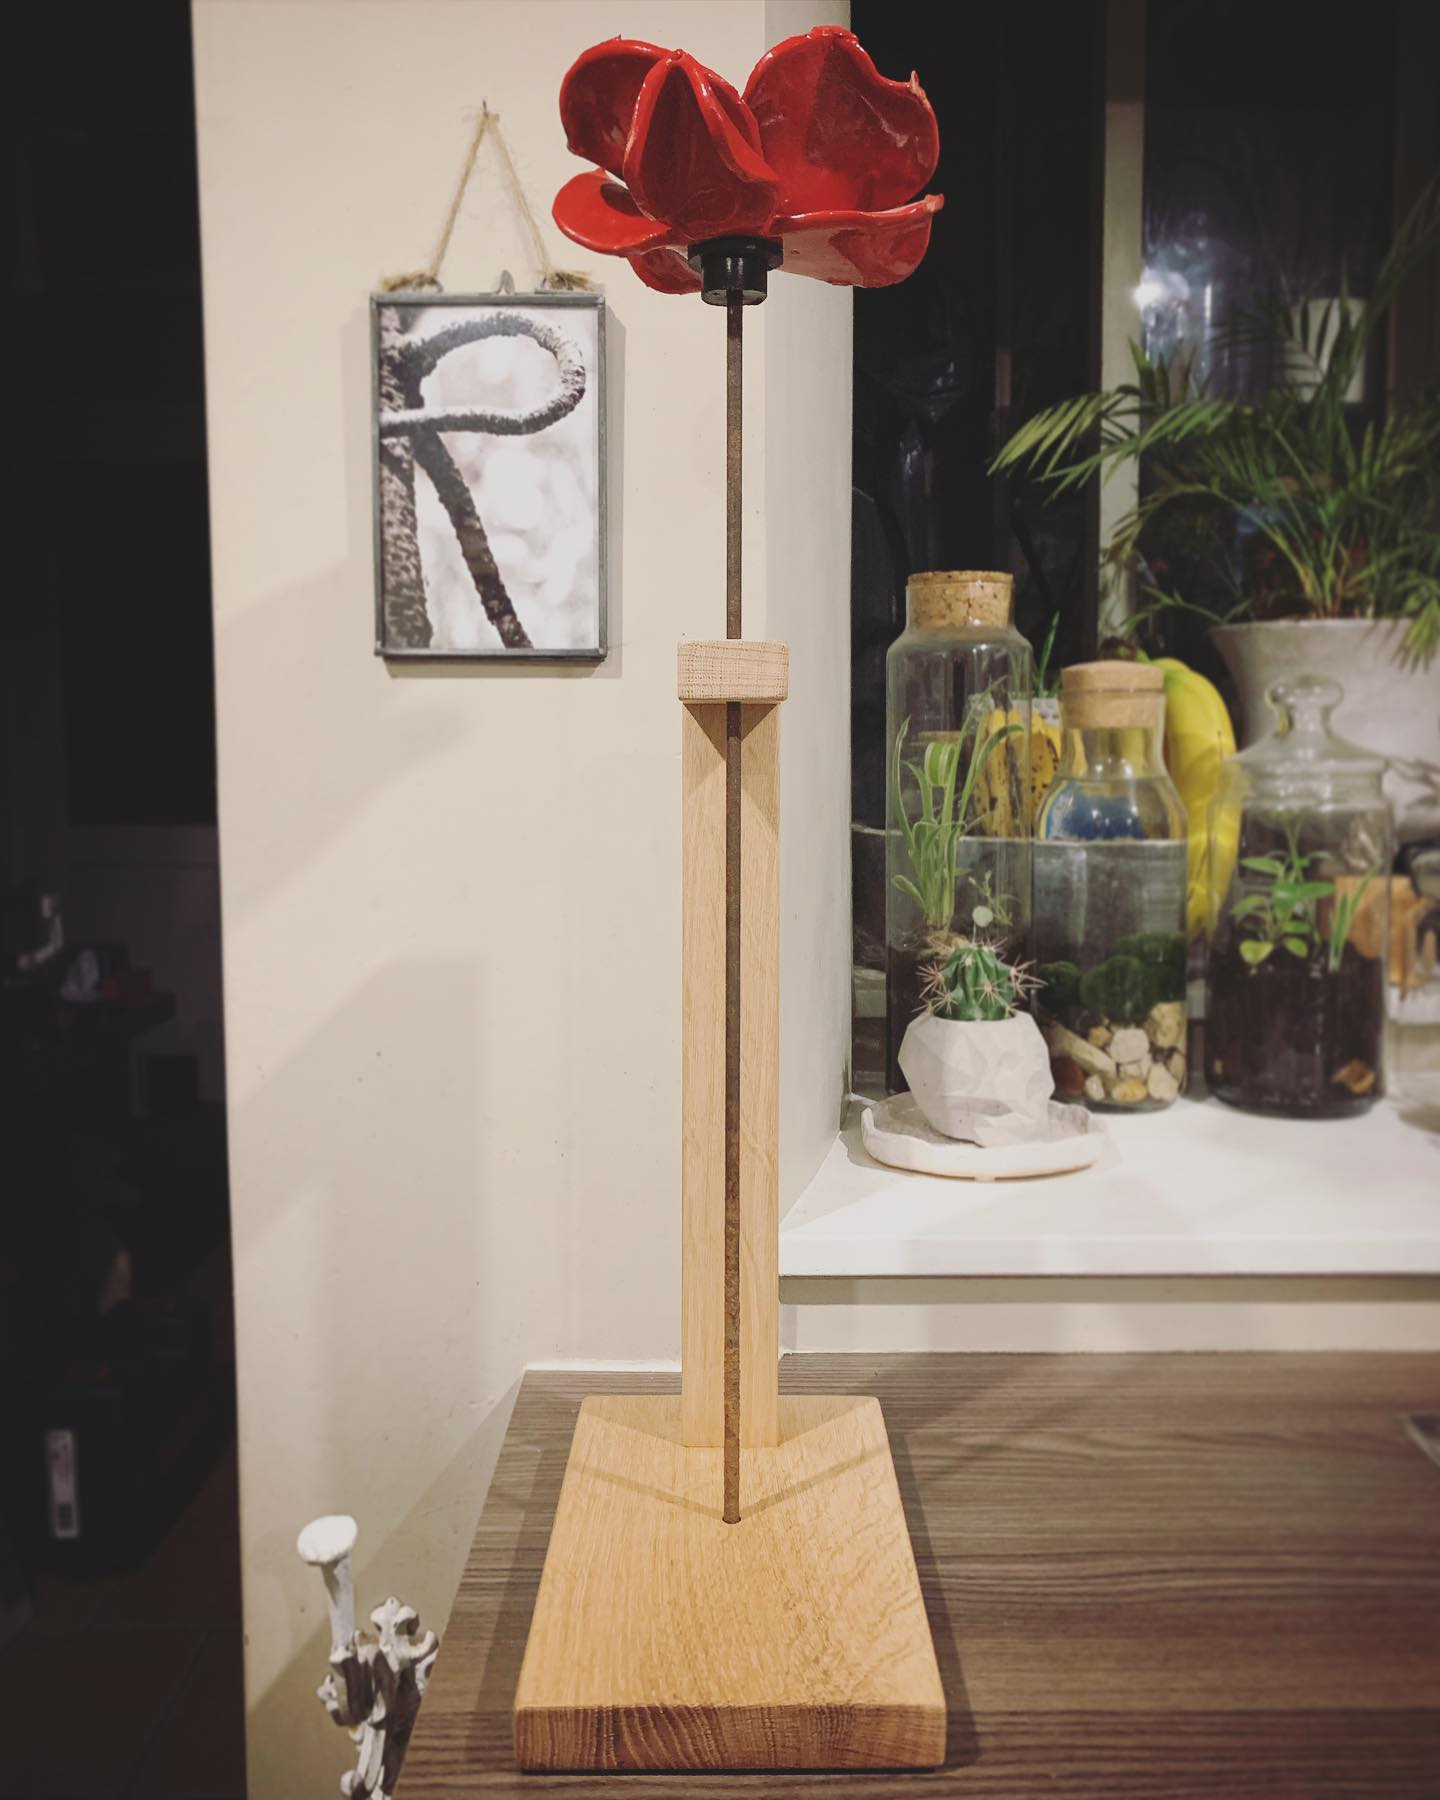 We’ll be taking some of these display stands with us to @clevedonsundaymarket tomorrow. A lovely way to display those very special remembrance poppies from the Tower of London exhibit. We shared a photo a few months ago and have now managed to make a small batch so we’re super excited to finally take them to a market. They’ll also be available to order online soon!